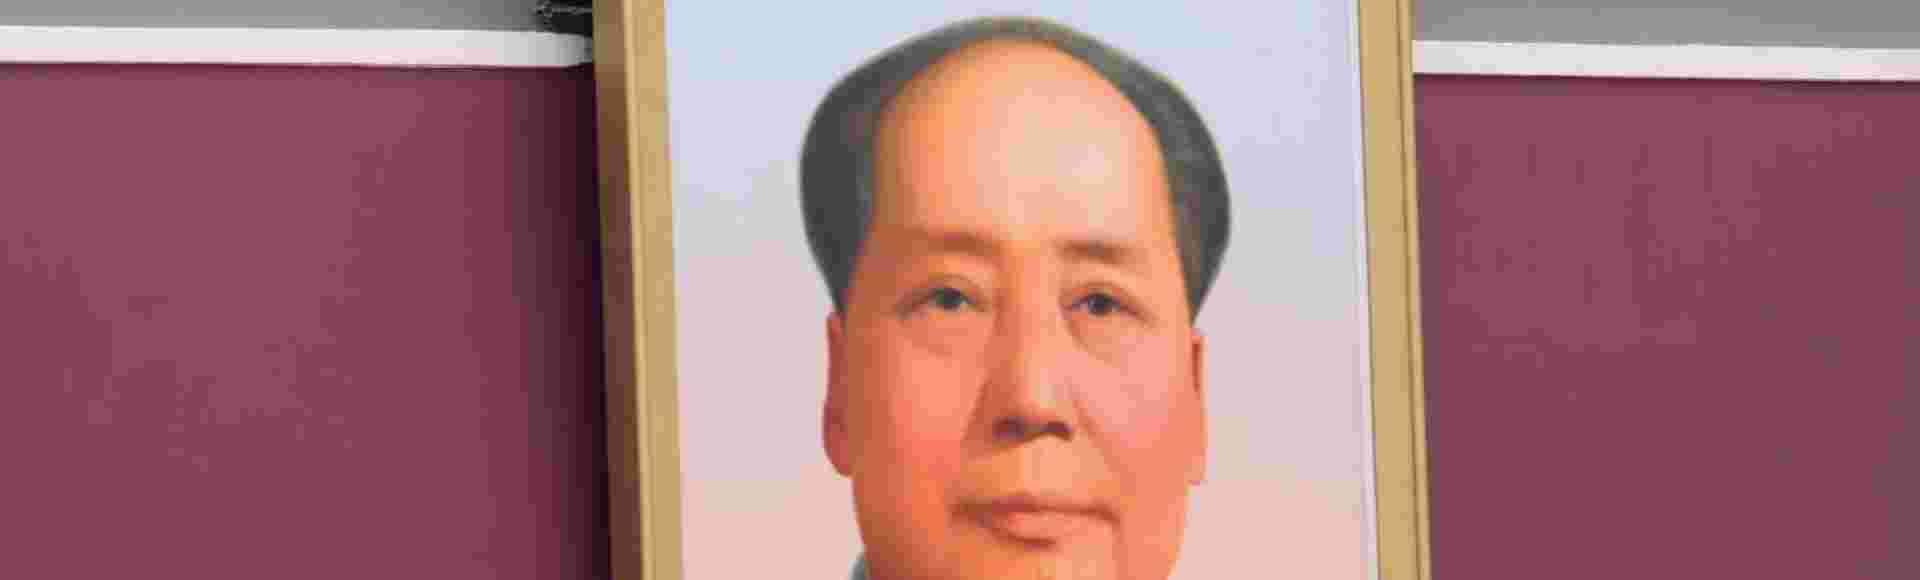 Xi Jinping waves above a large portrait of the late leader Mao Zedong during a ceremony to mark the 100th anniversary of the founding of the ruling Chinese Communist Party.